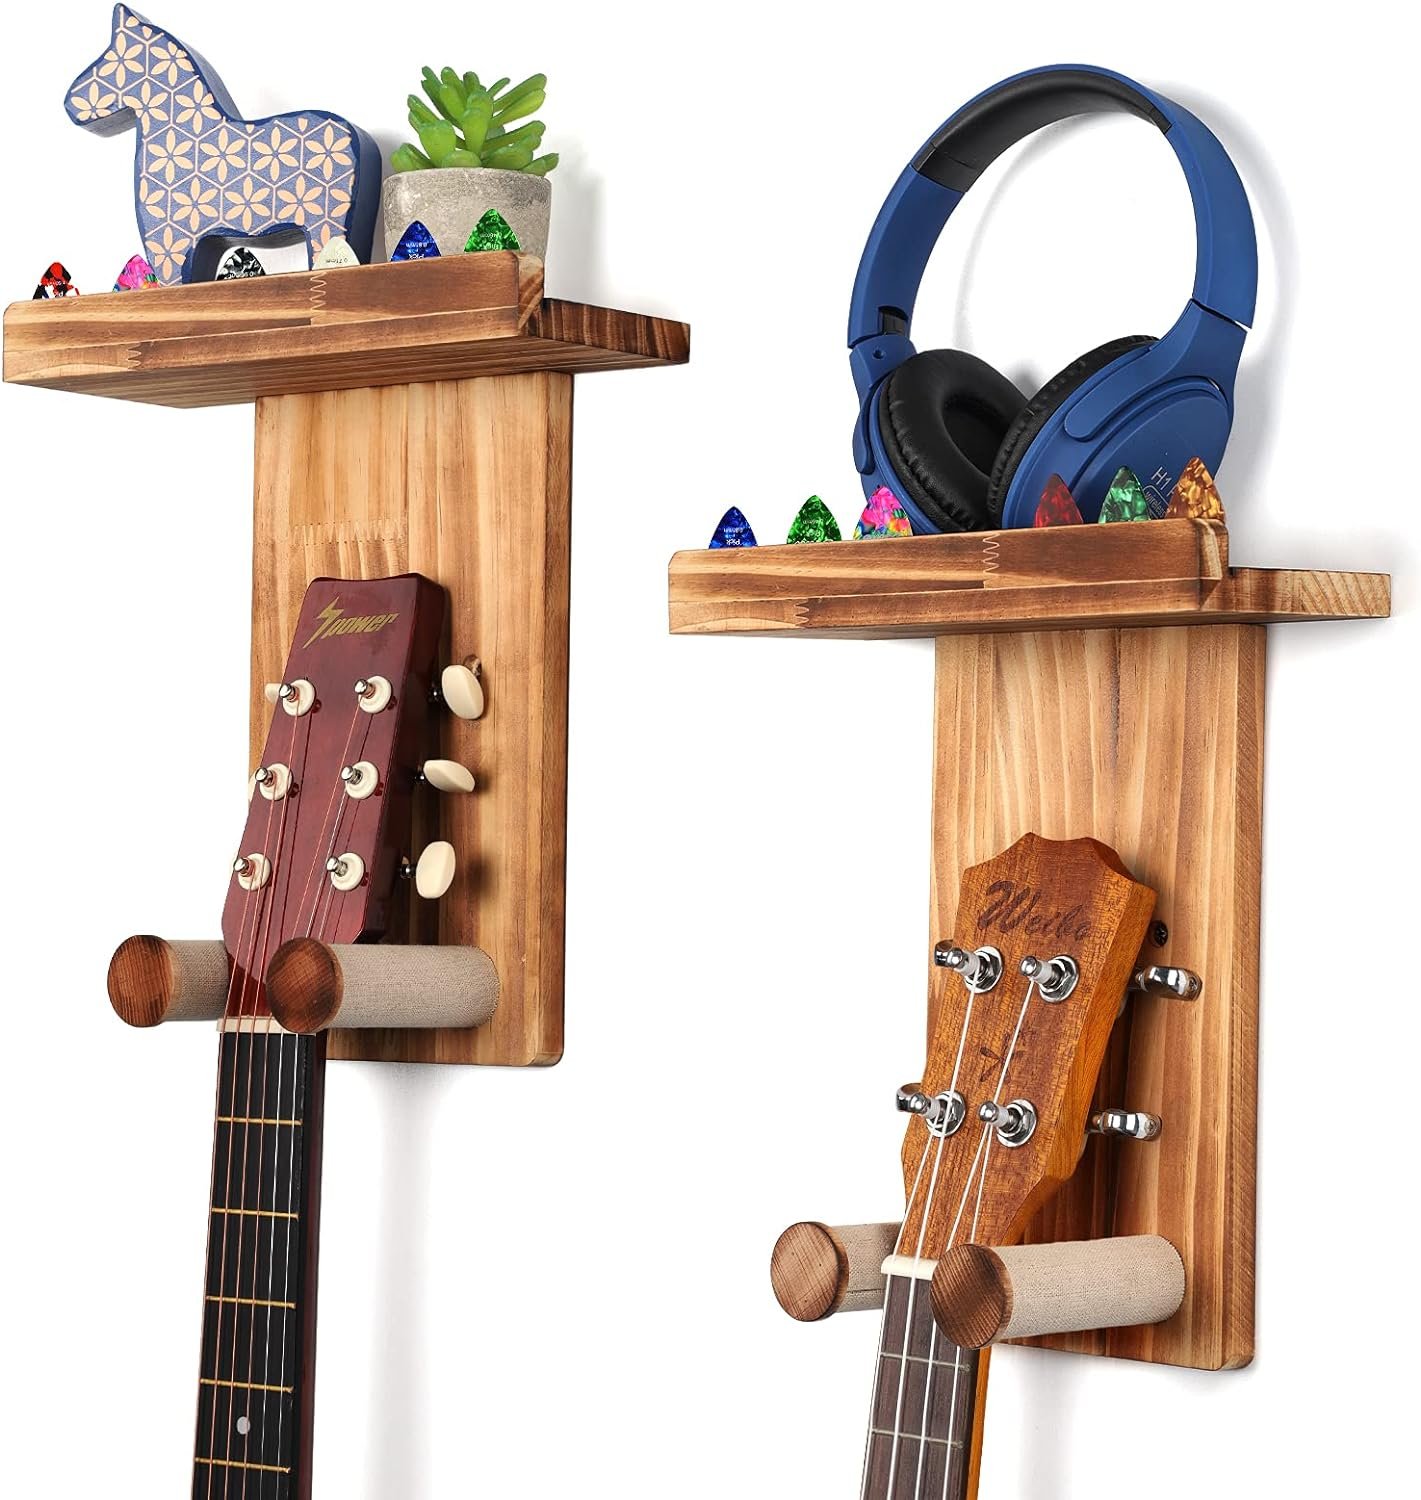 Keebofly Guitar Wall Mount,2 Pack Guitar Wall Hangers Holder Guitar Hanger Shelf with Pick Holder Wood Guitar Rack for Acoustic or Electric Guitar,Ukulele,Bass,Mandolin Brown,[Patented]